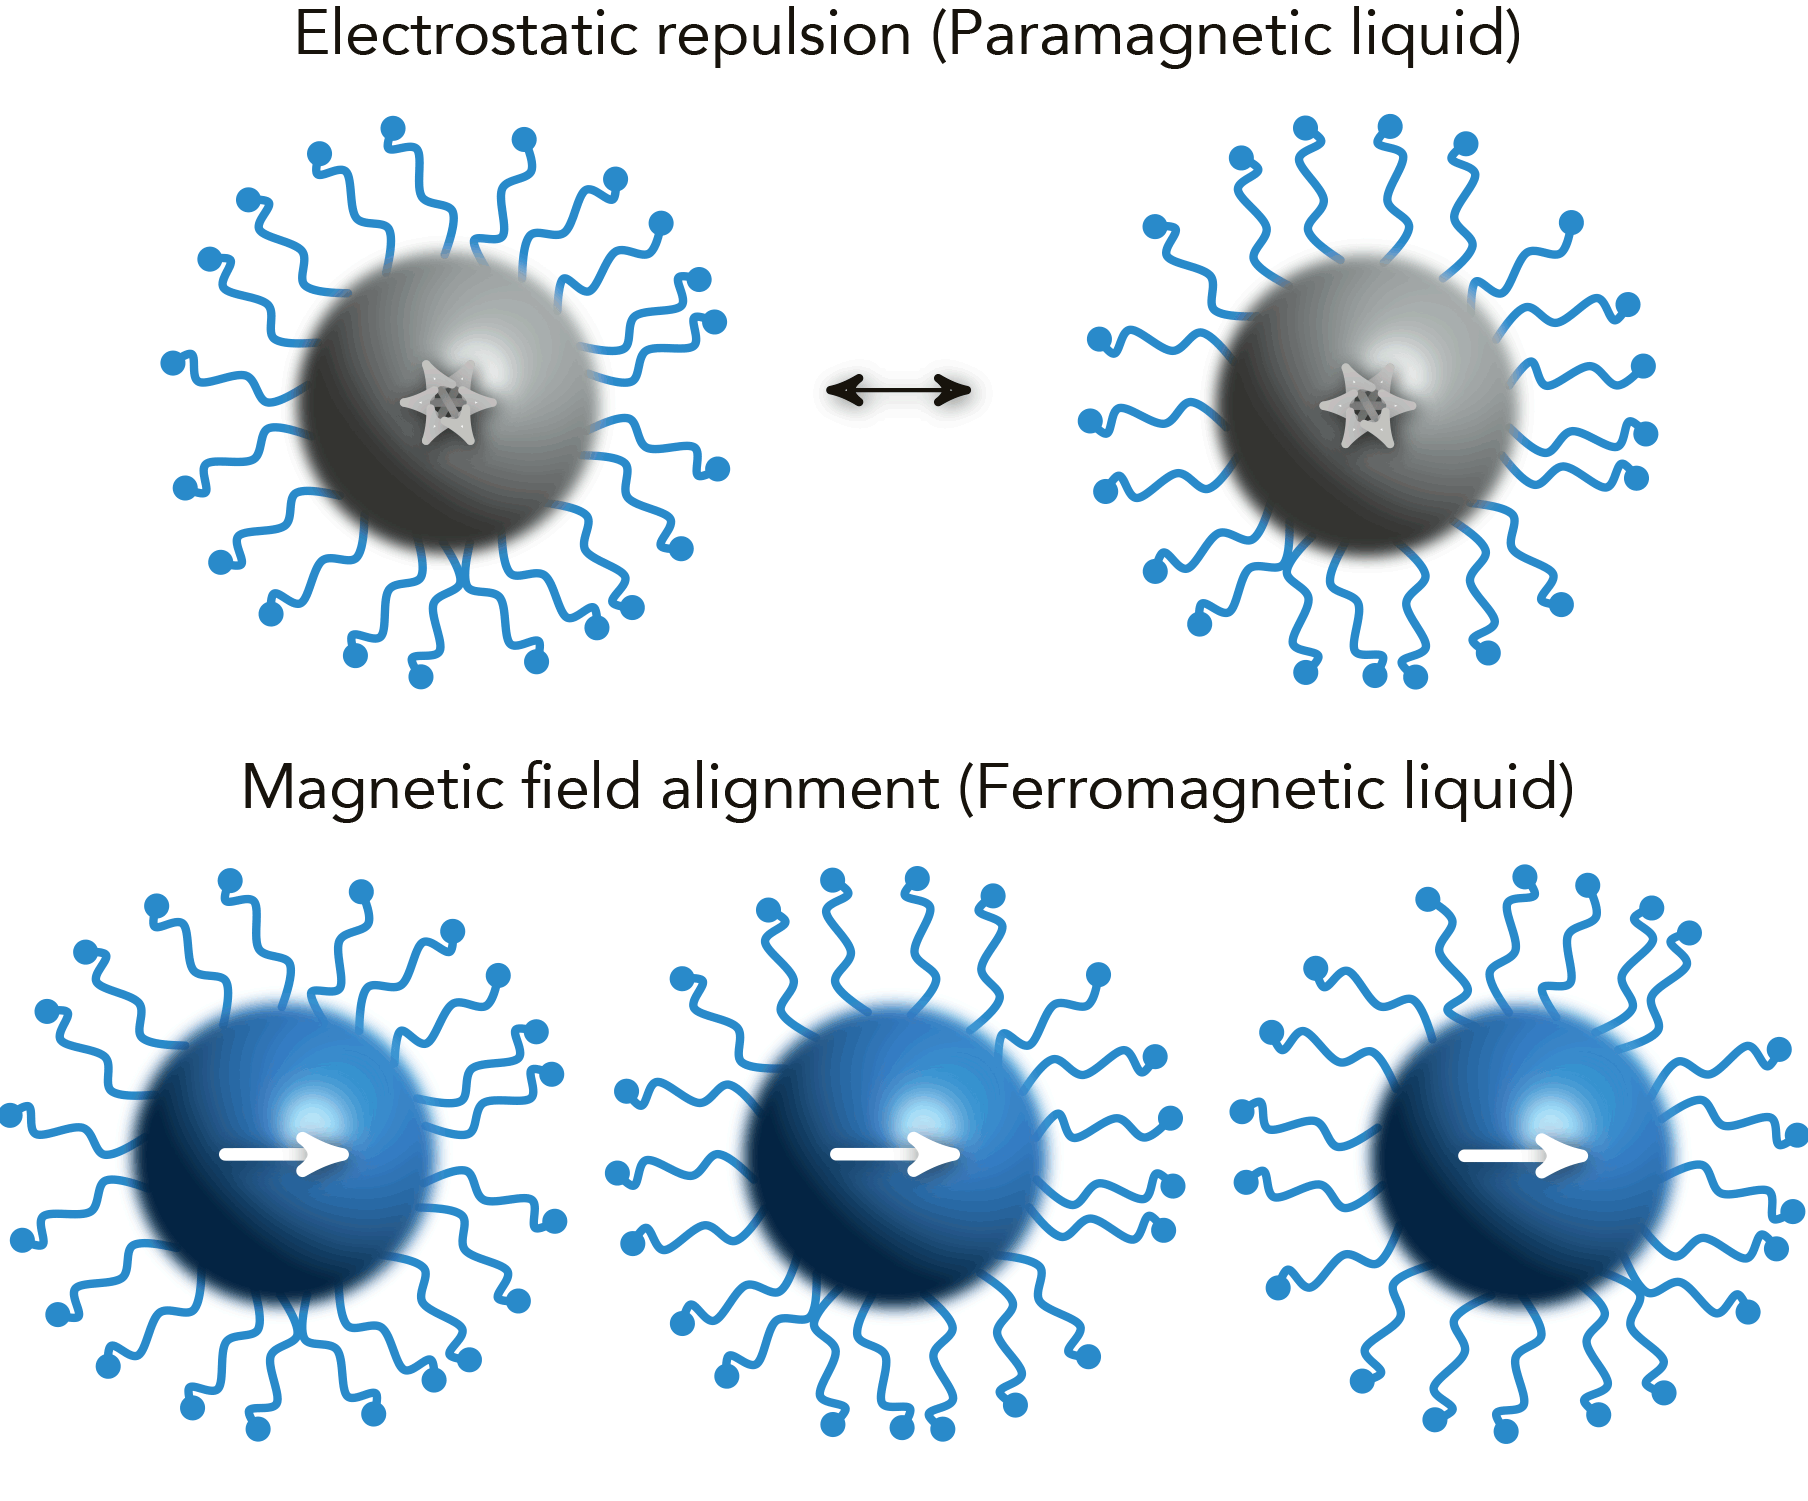 Fig. 2 When no external magnetic field is present, the behavior of magnetic nanoparticles is governed by electrostatic repulsion—in other words, like charges repel, so the nanoparticles tend to stay away from one another (top). When an external magnetic field is applied, however, the magnetic nanoparticles align so that the north pole of one particle attracts the south pole of an adjacent particle (bottom).